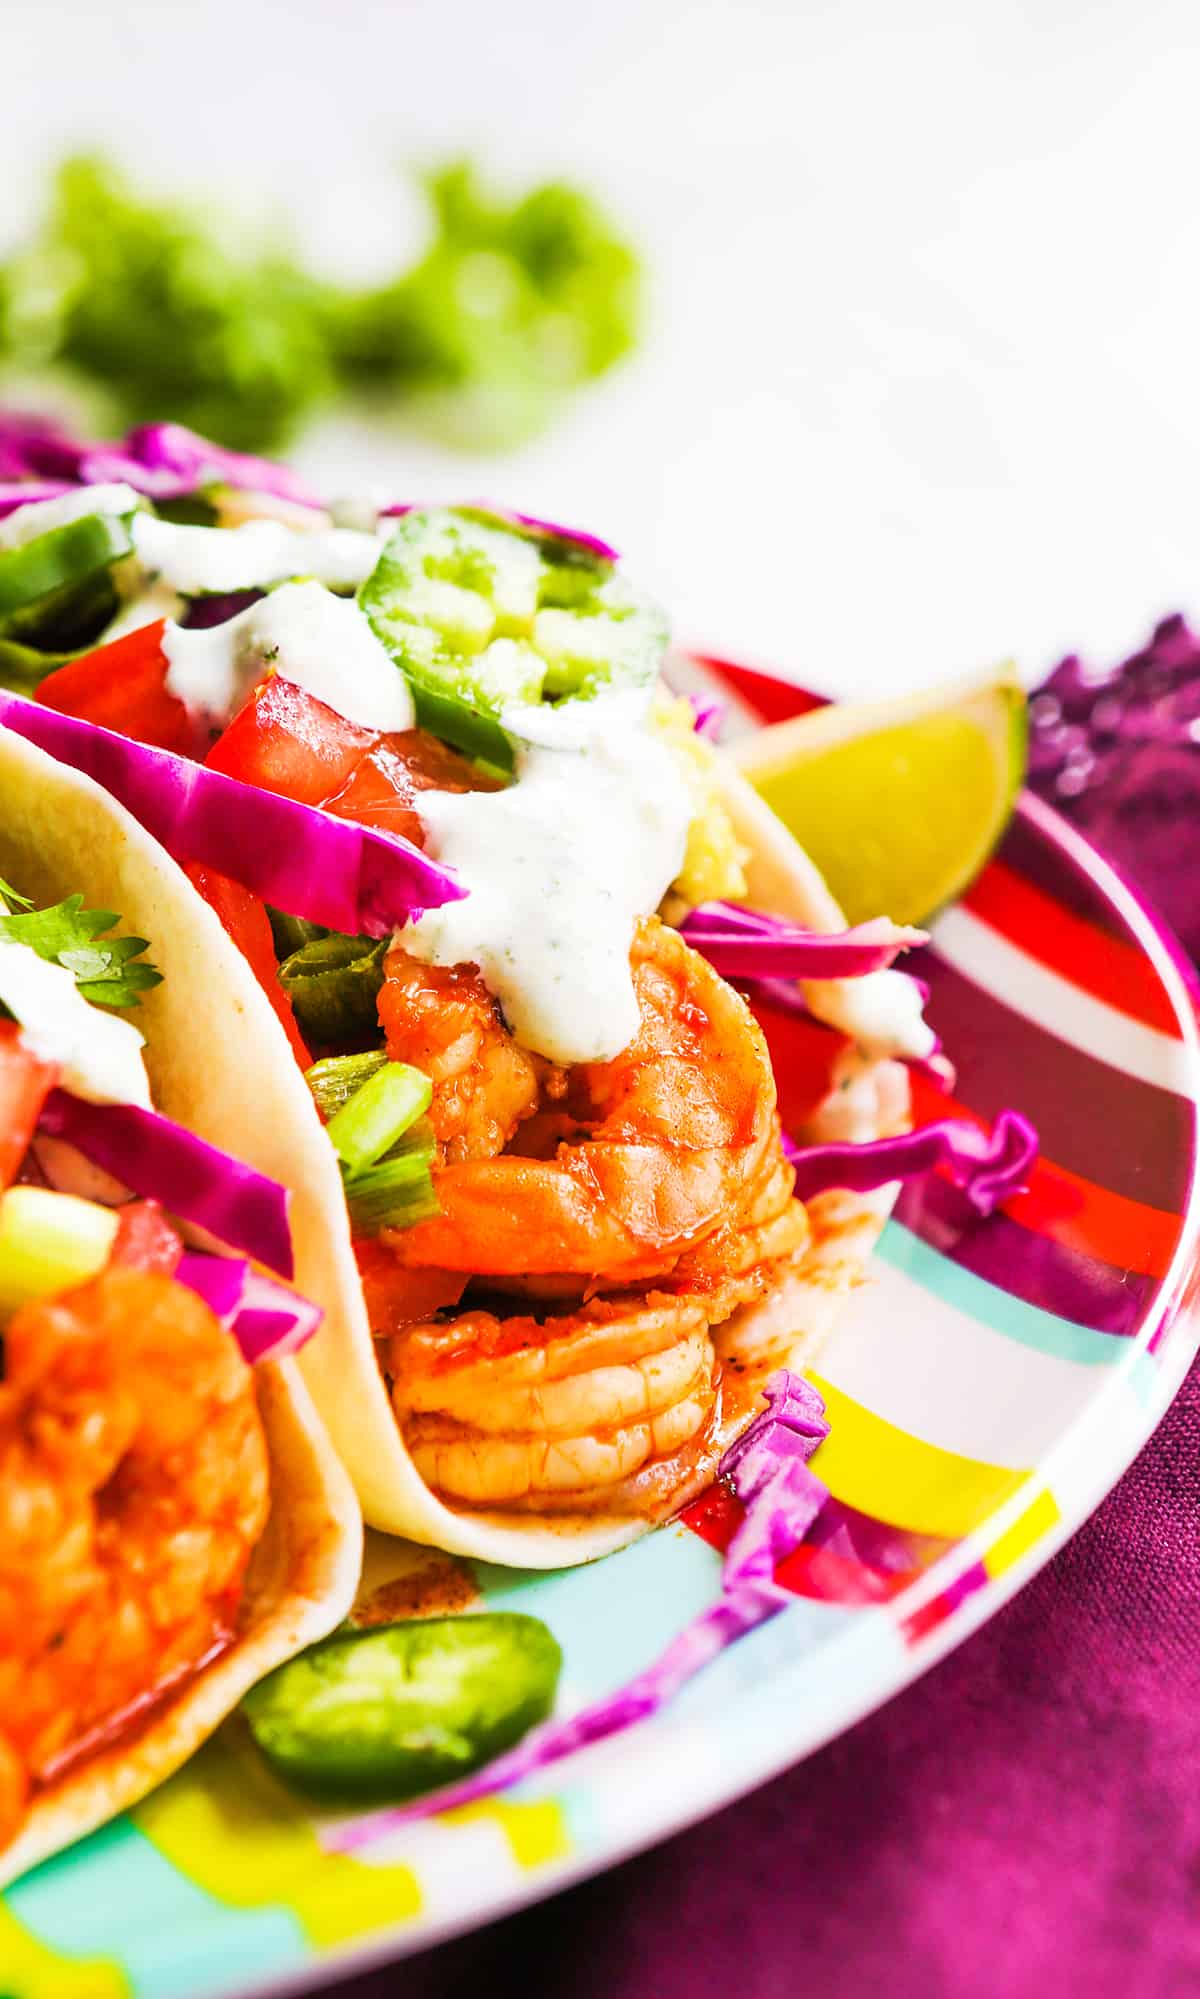 Shrimp tacos with sauce drizzled over the top.